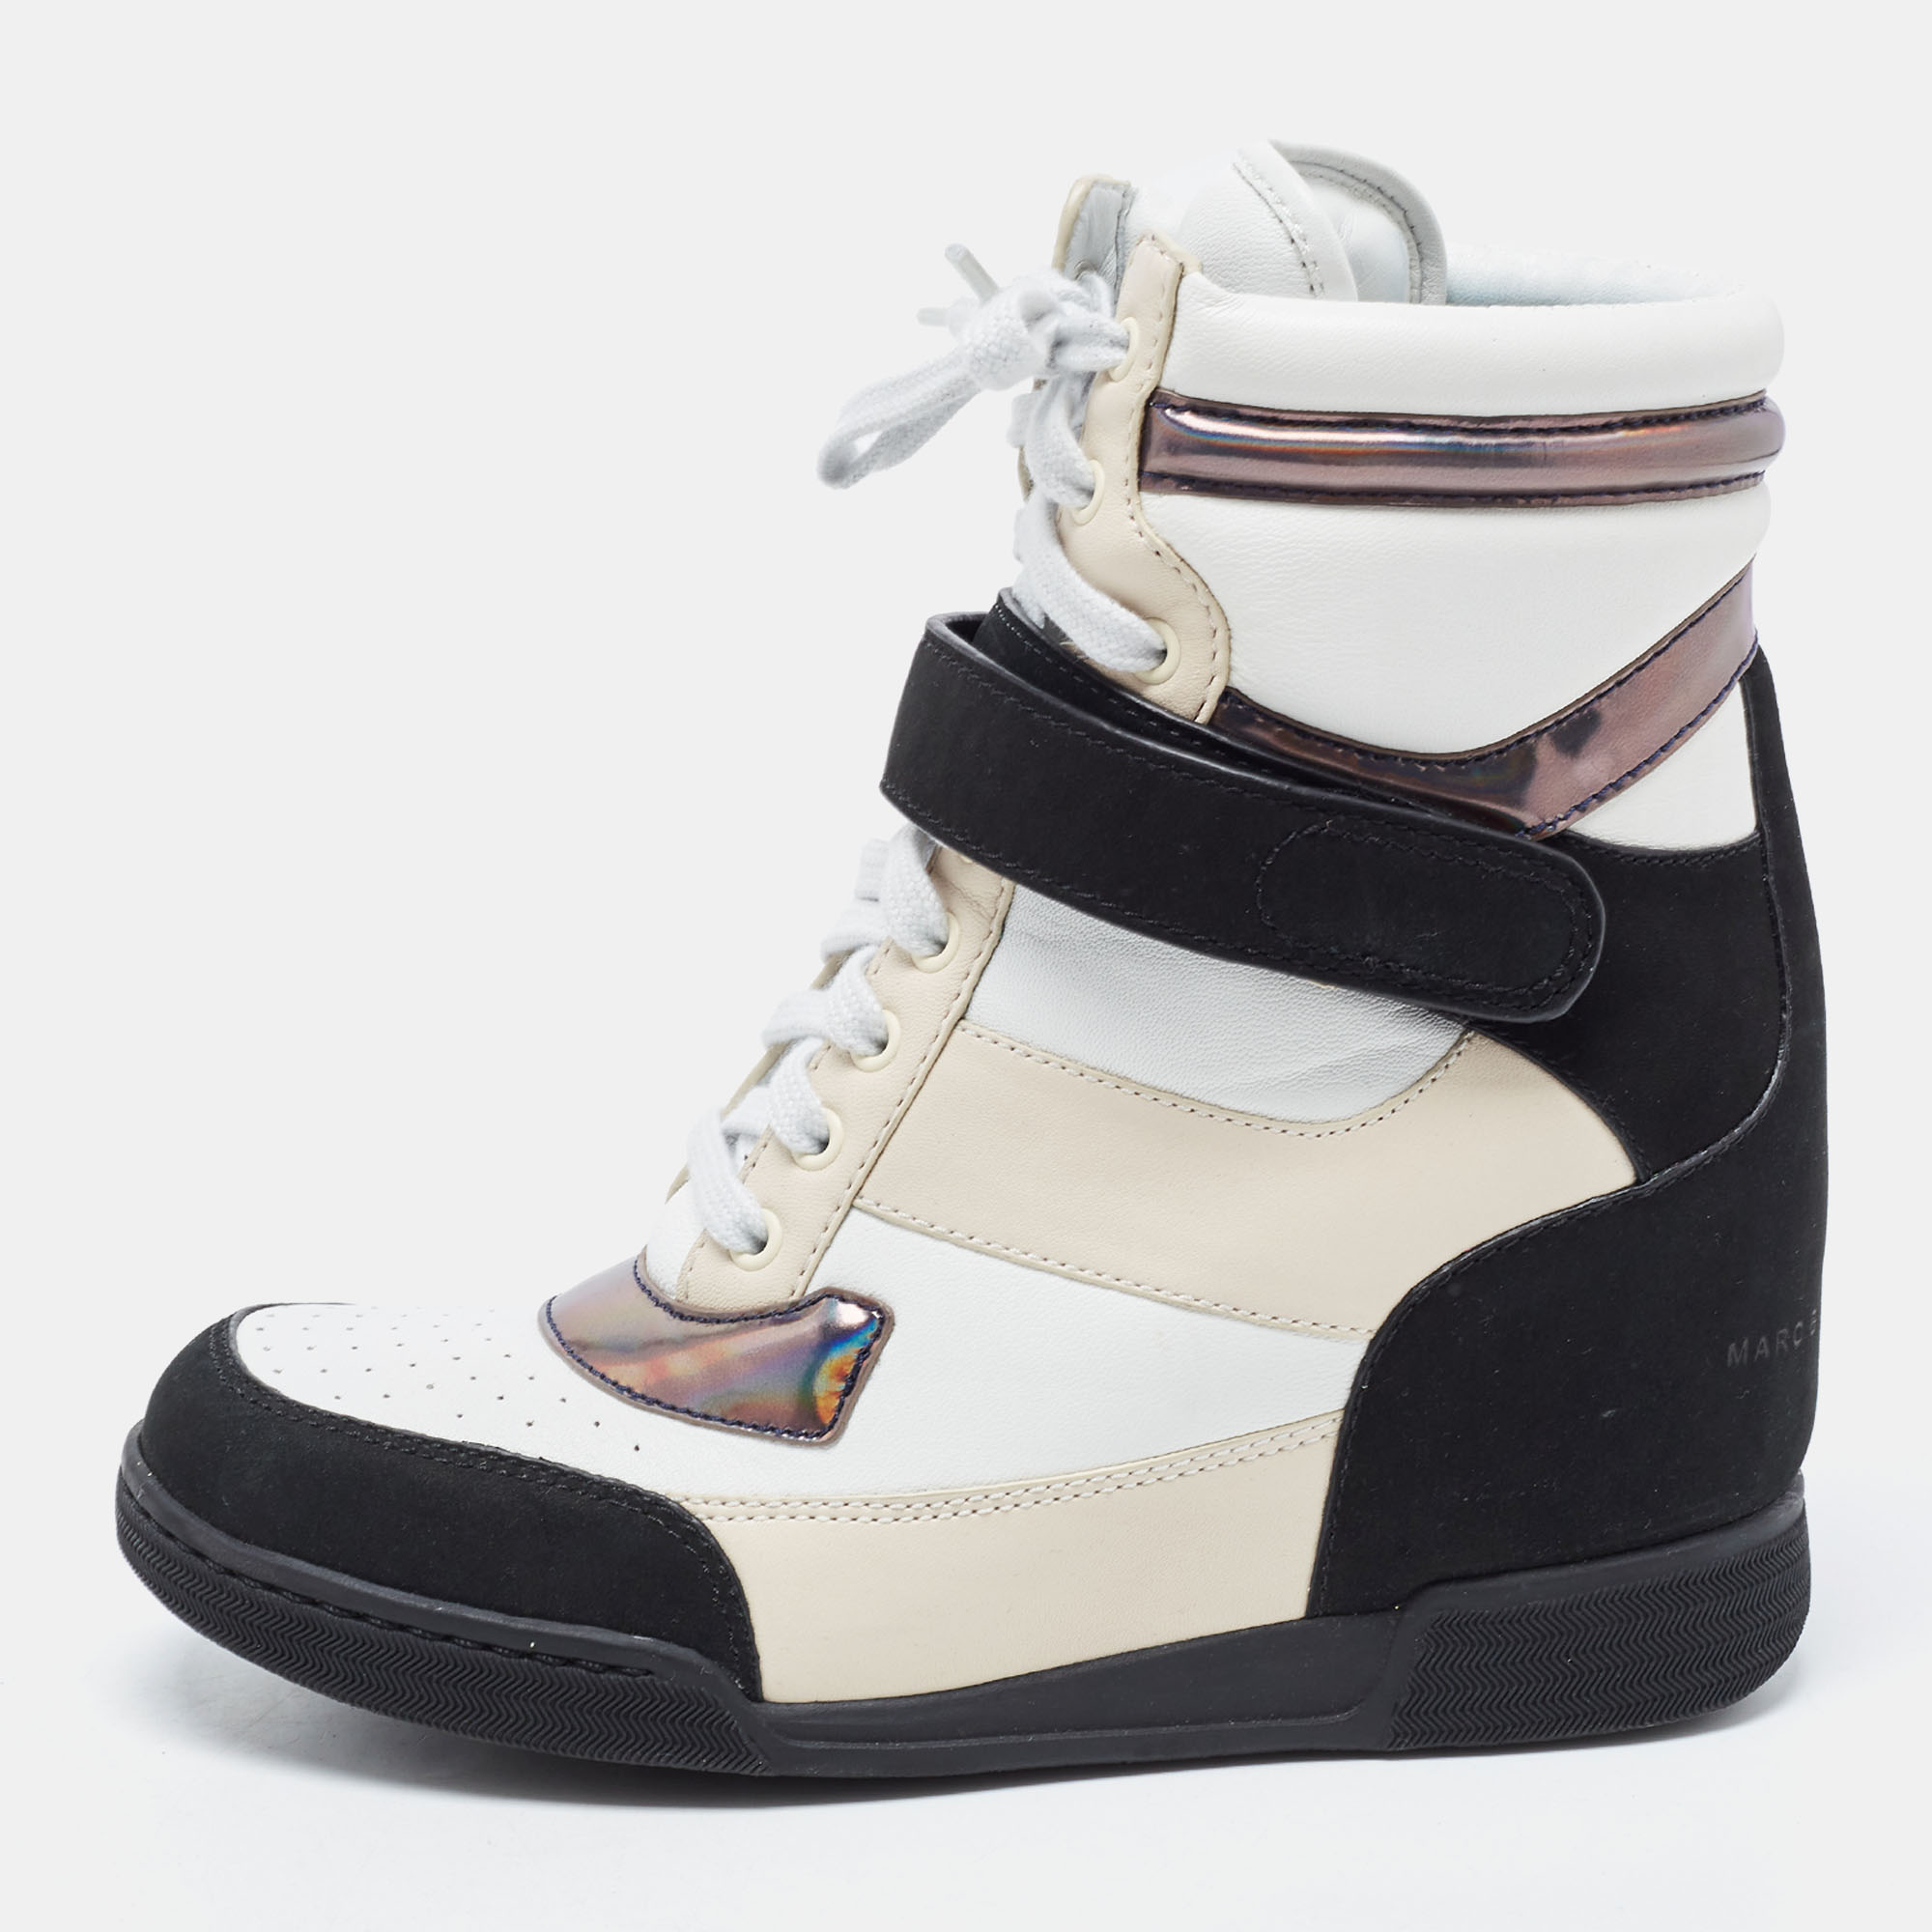 Marc by marc jacobs tri color leather lace up wedge sneakers size 38